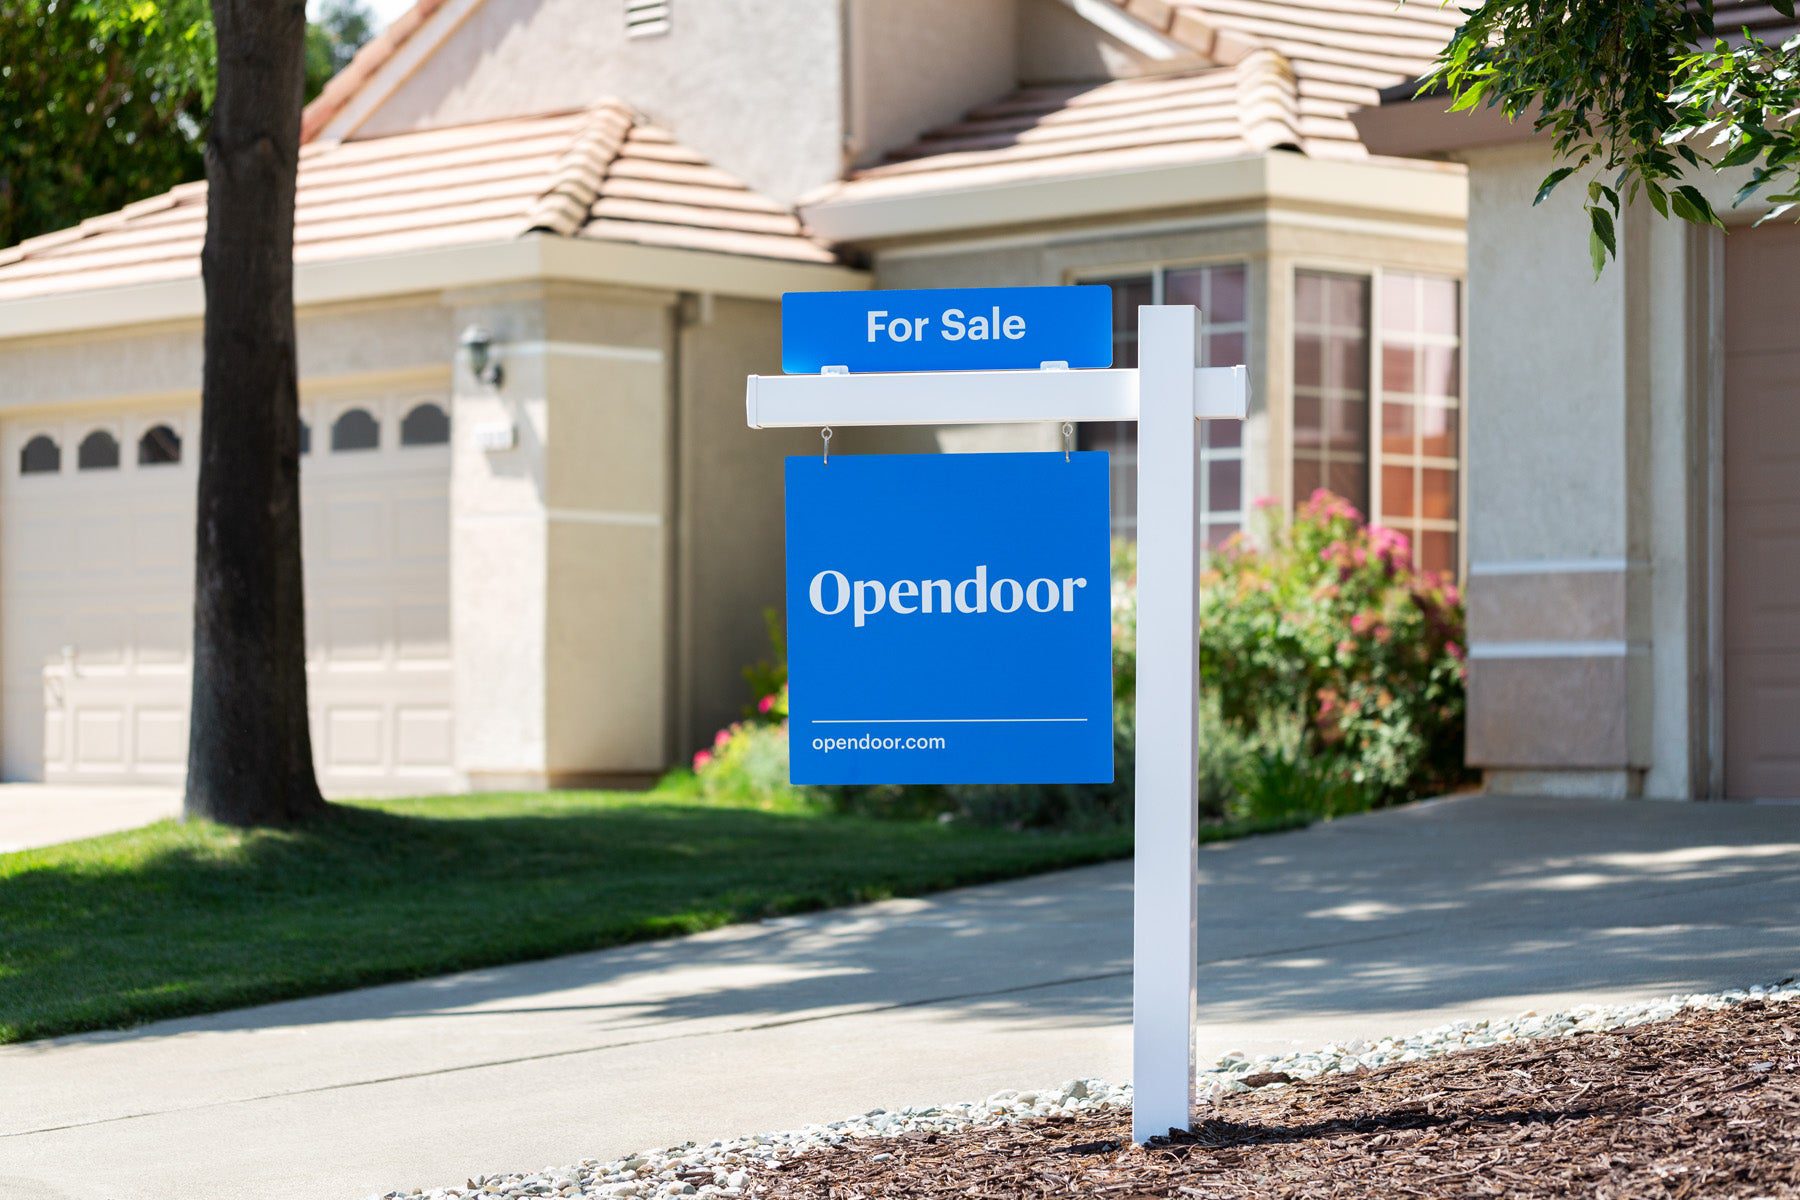 Opendoor real estate reviews – Should I sell to Opendoor?